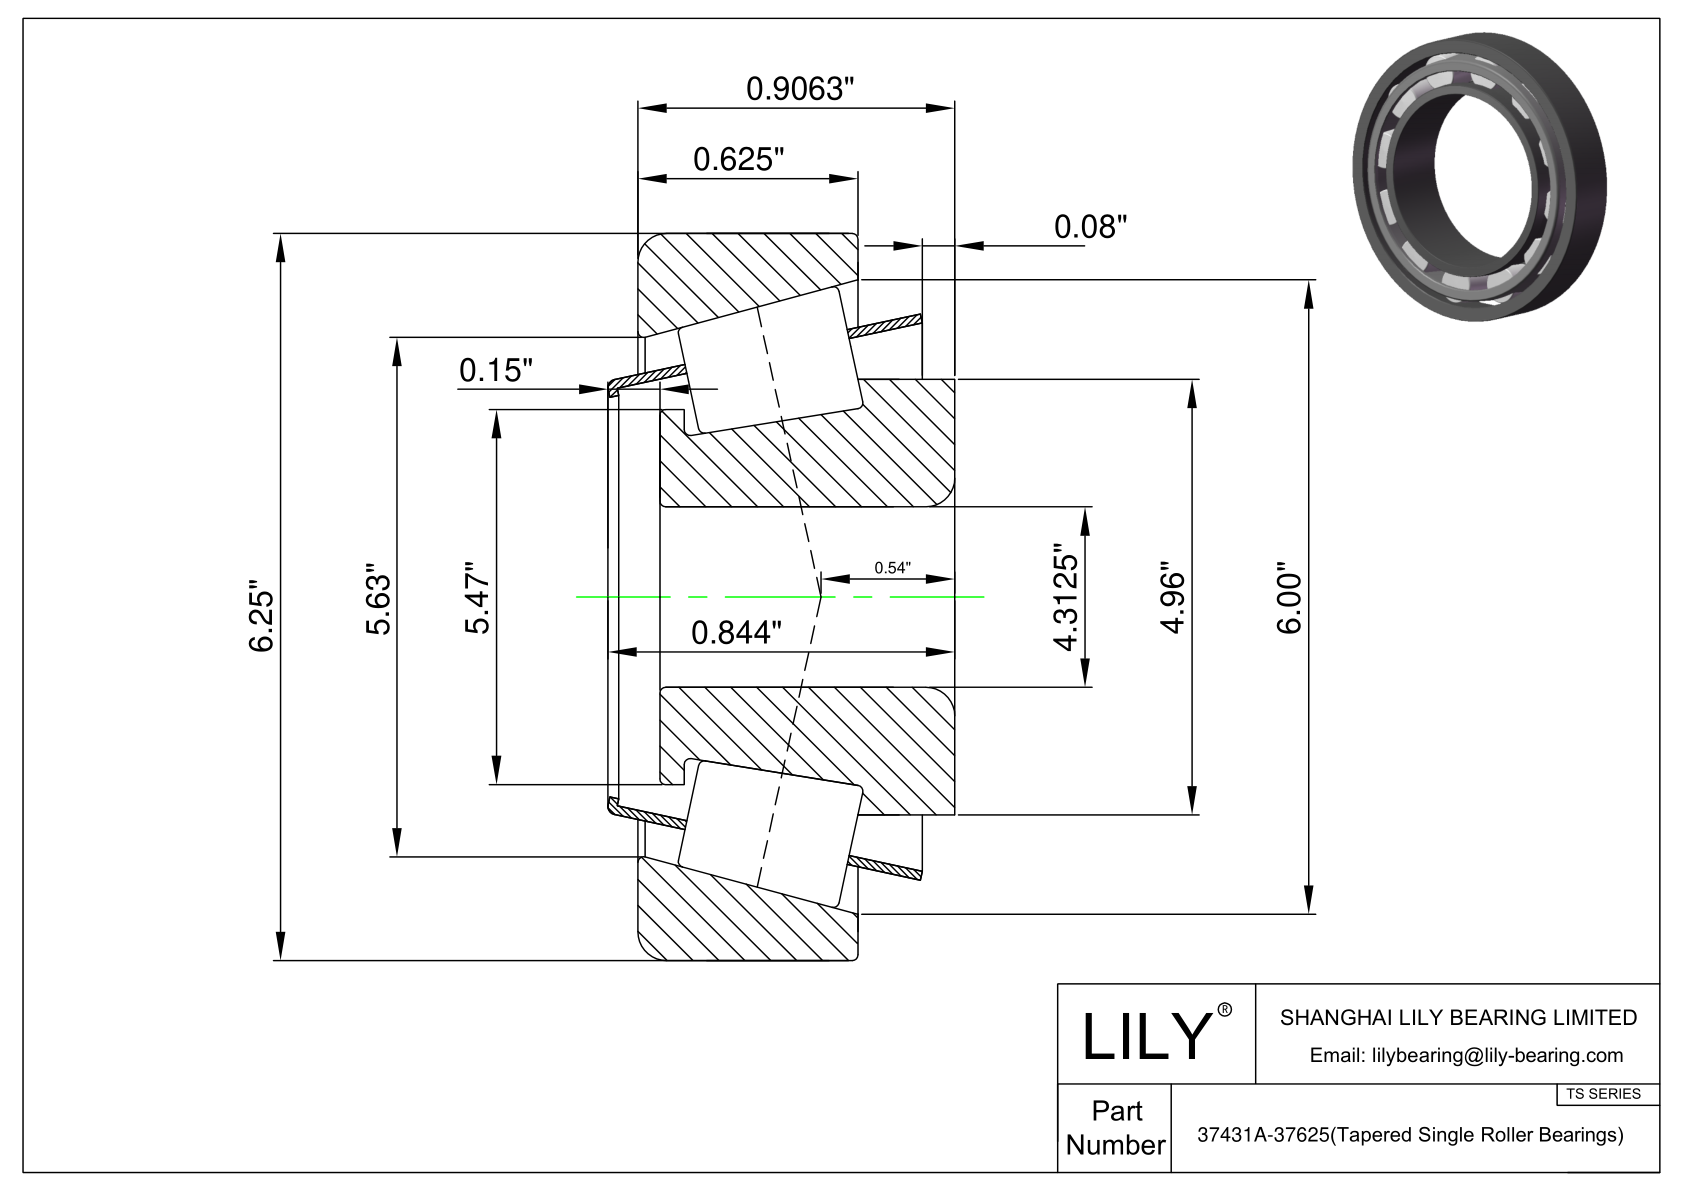 37431A-37625 TS (Tapered Single Roller Bearings) (Imperial) cad drawing